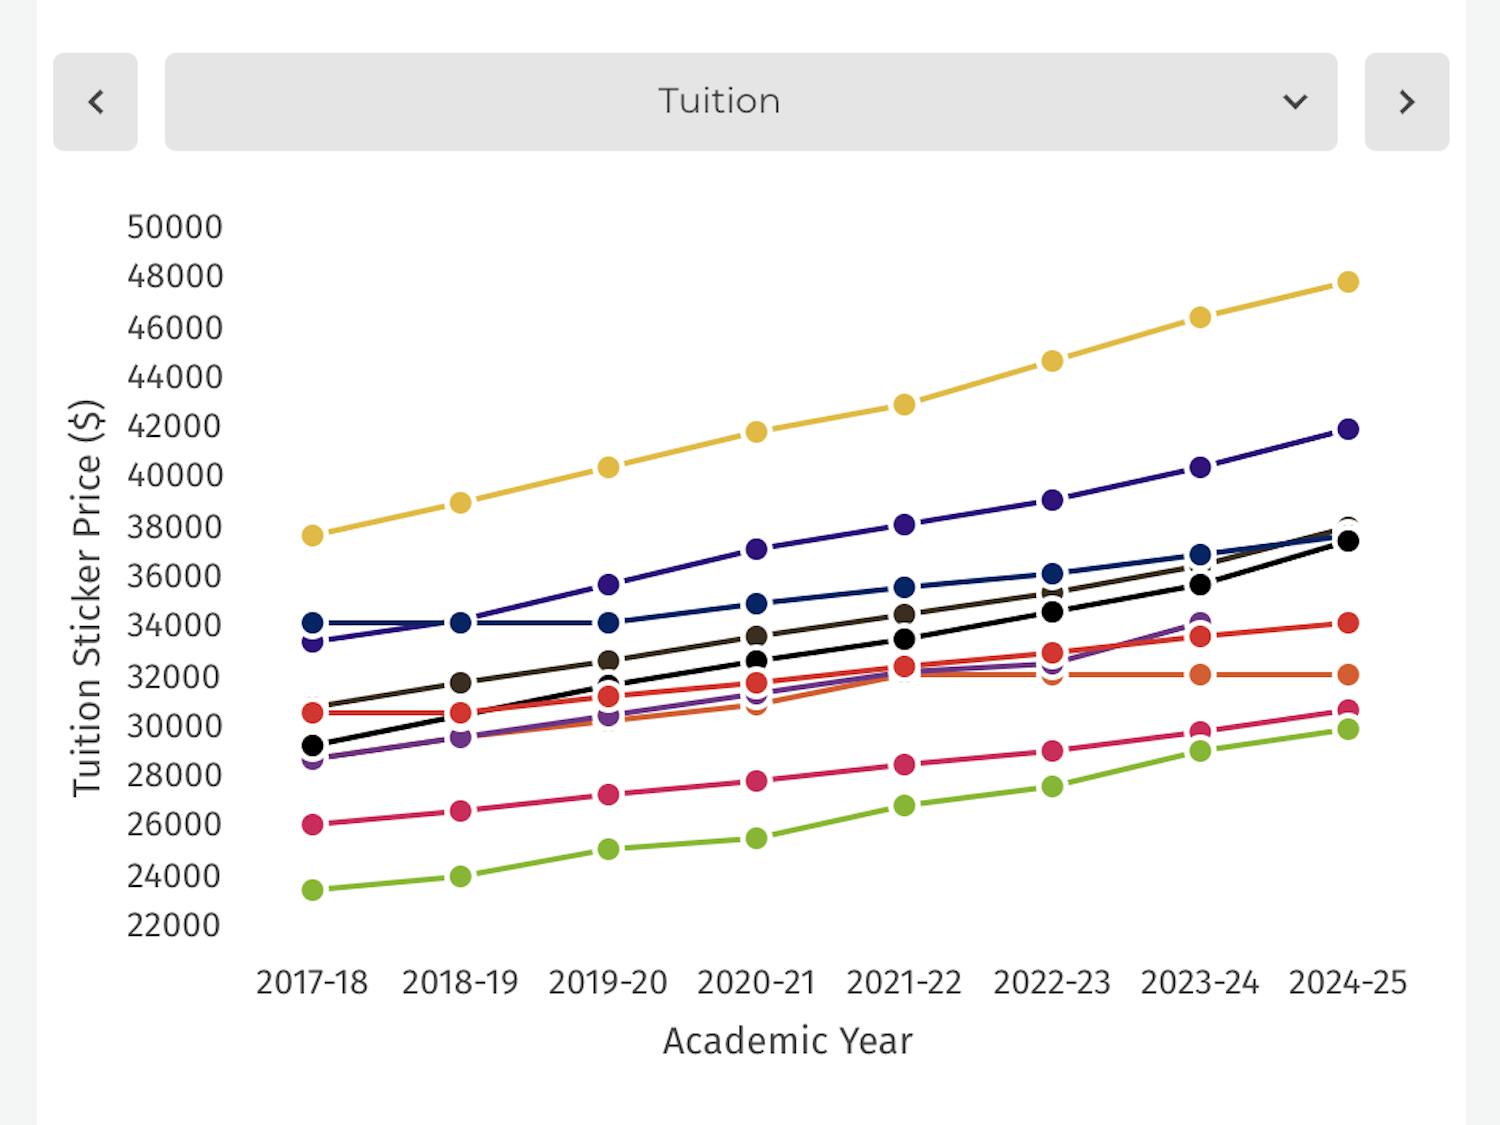 OAC tuition line graph